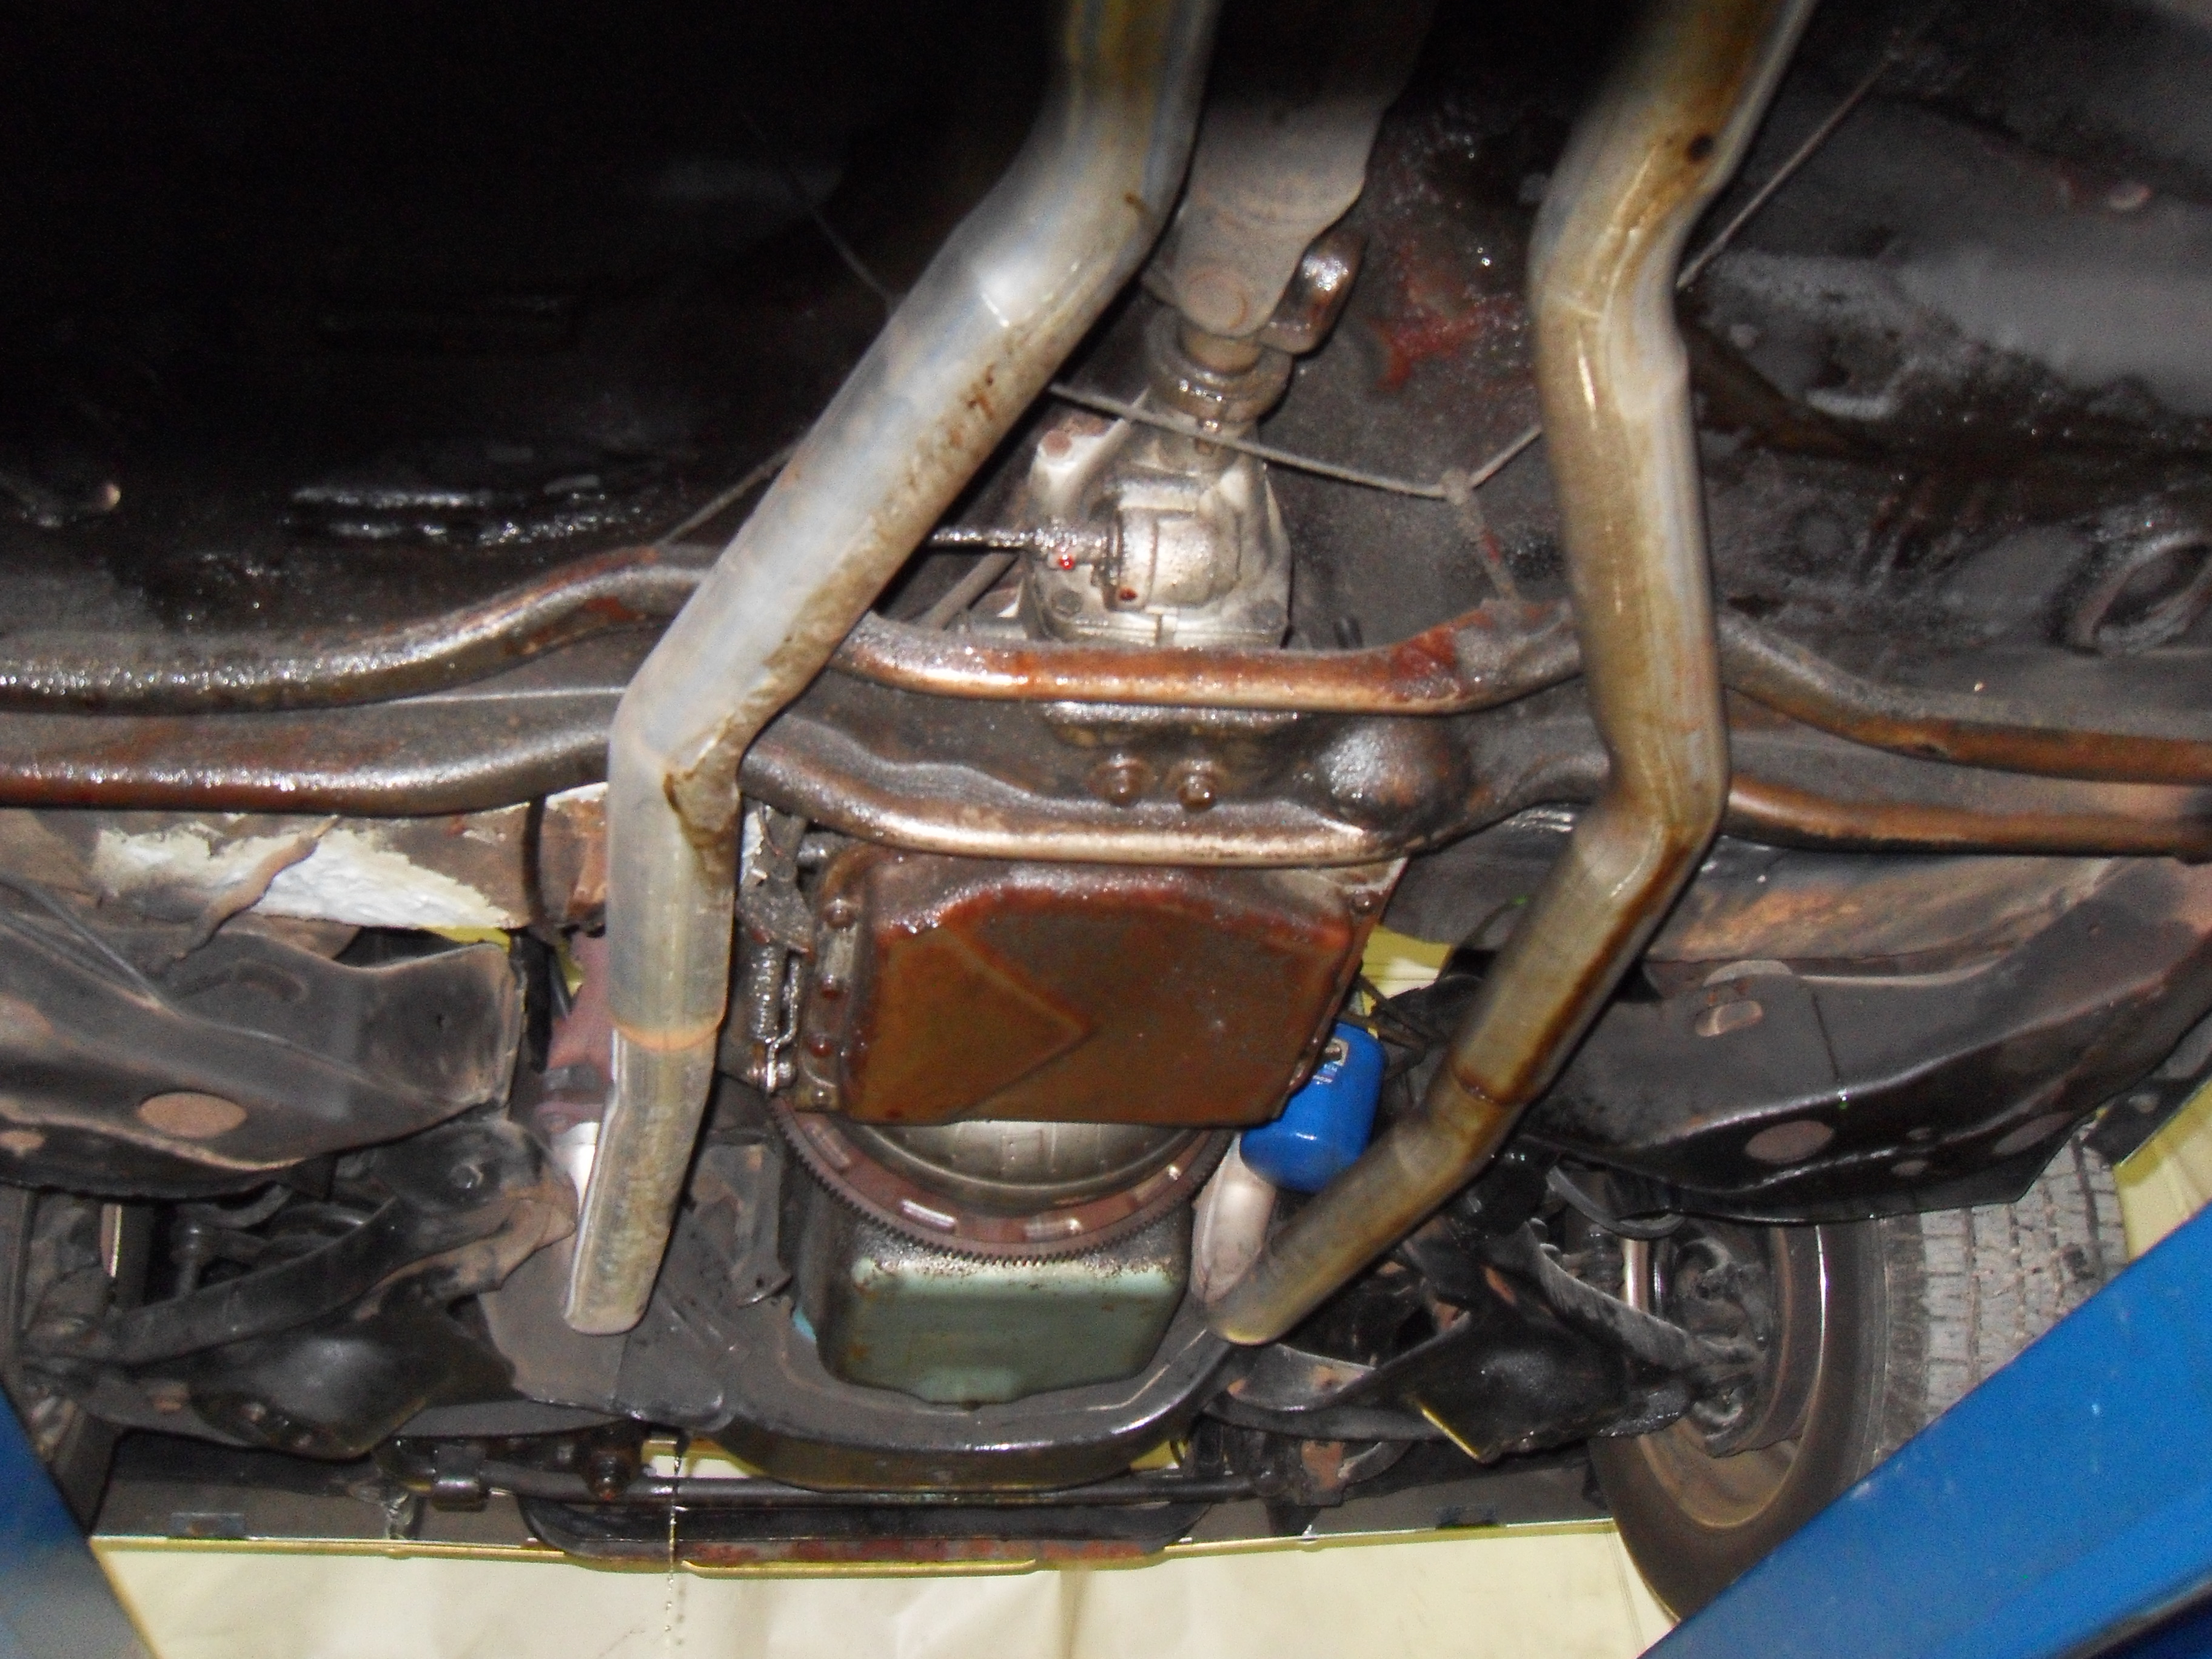 1966 GTO undercarriage before